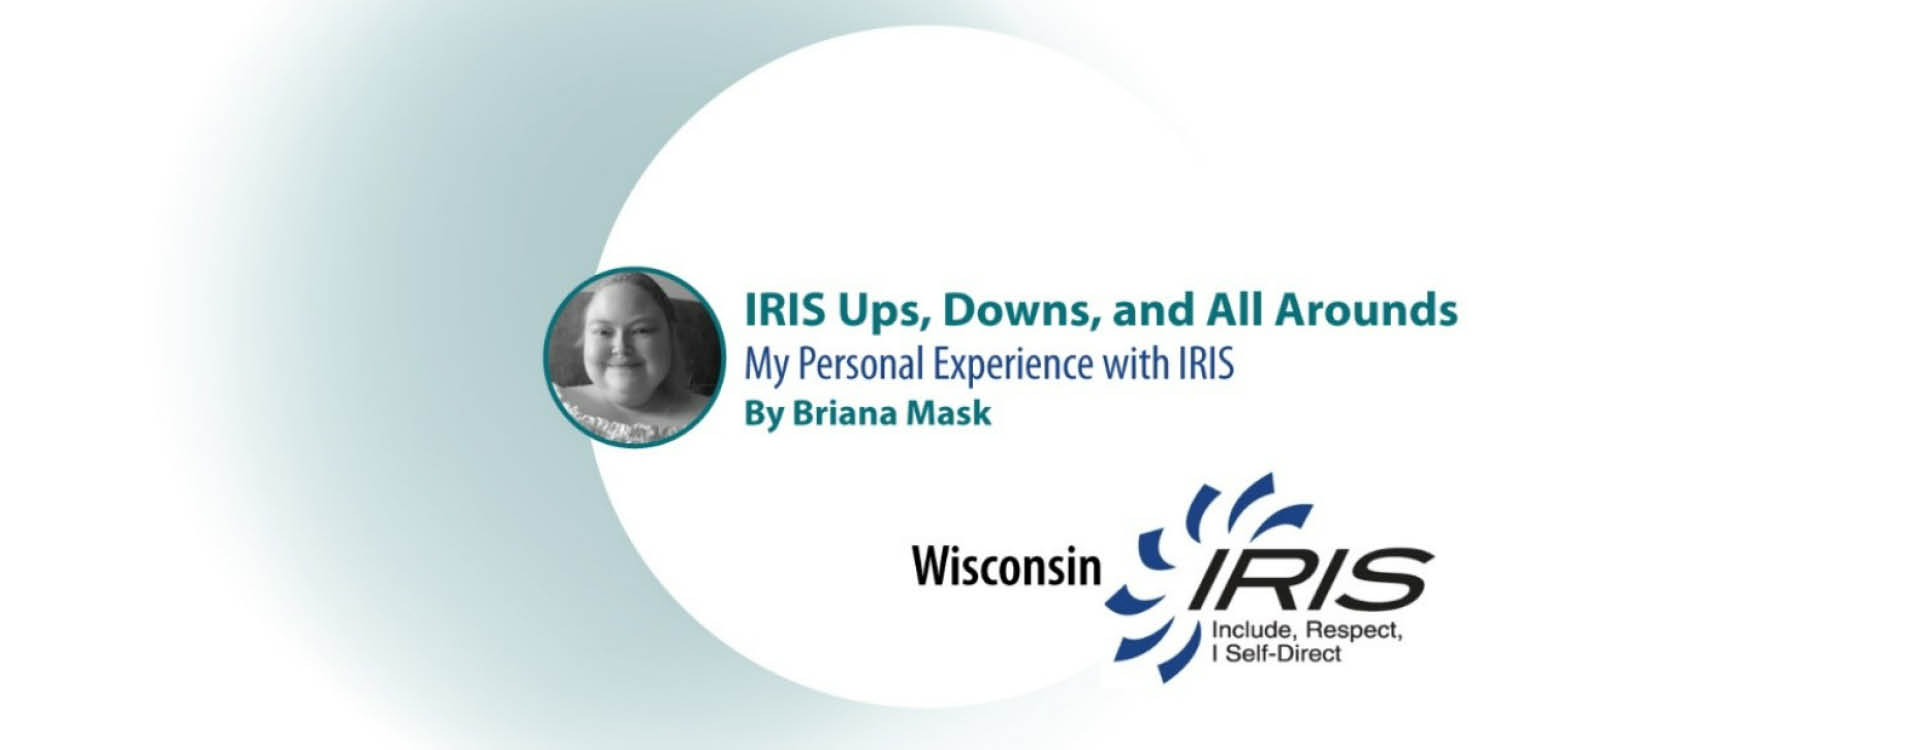 Featured image for “IRIS Ups, Downs, and All-Arounds”